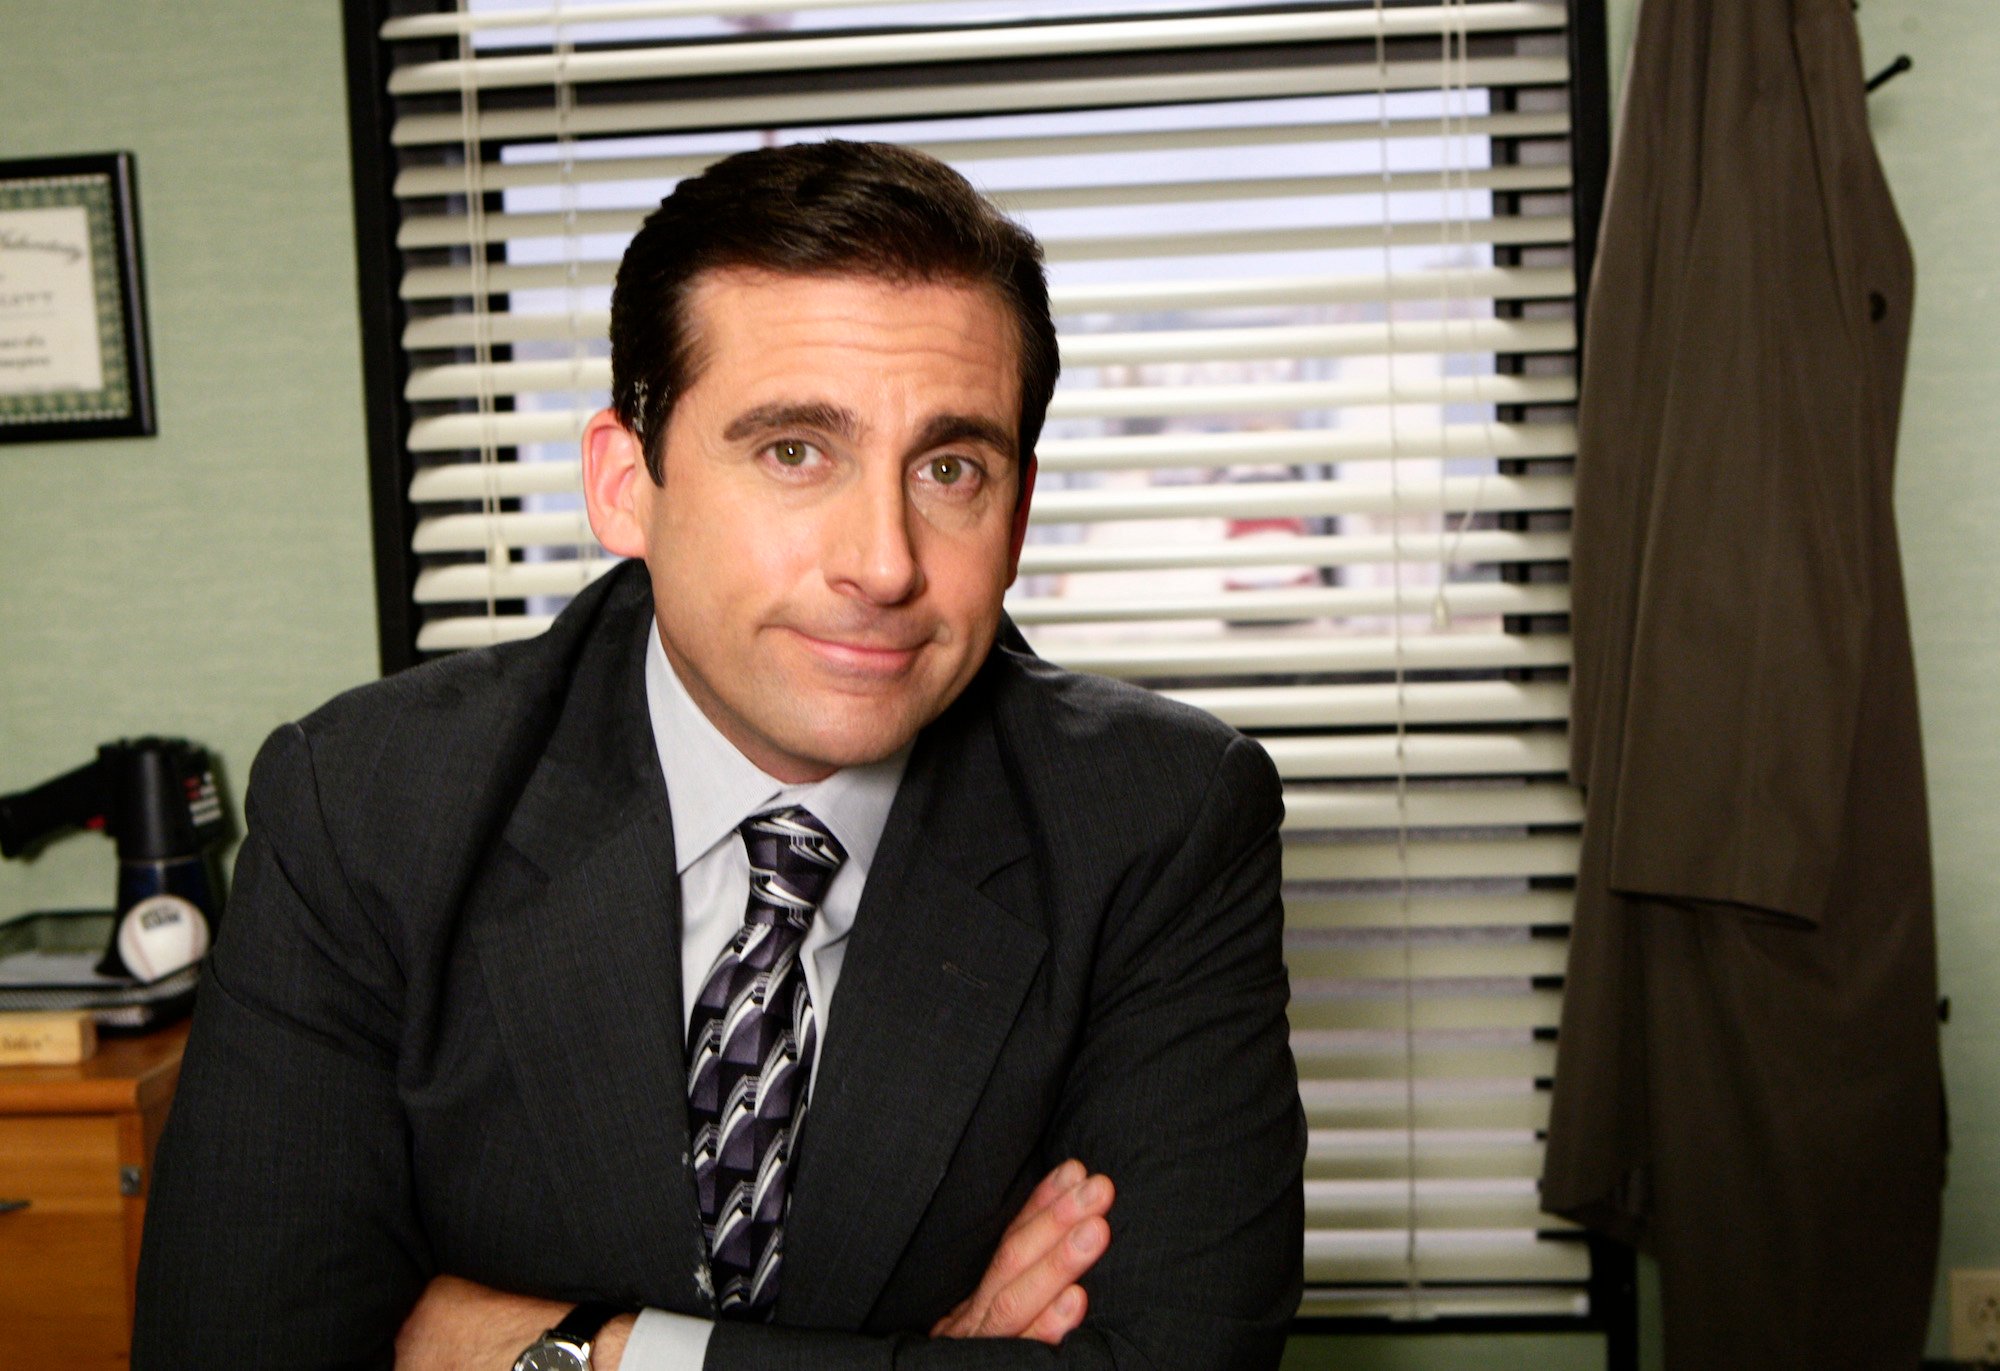 Steve Carell is sitting in an office room.